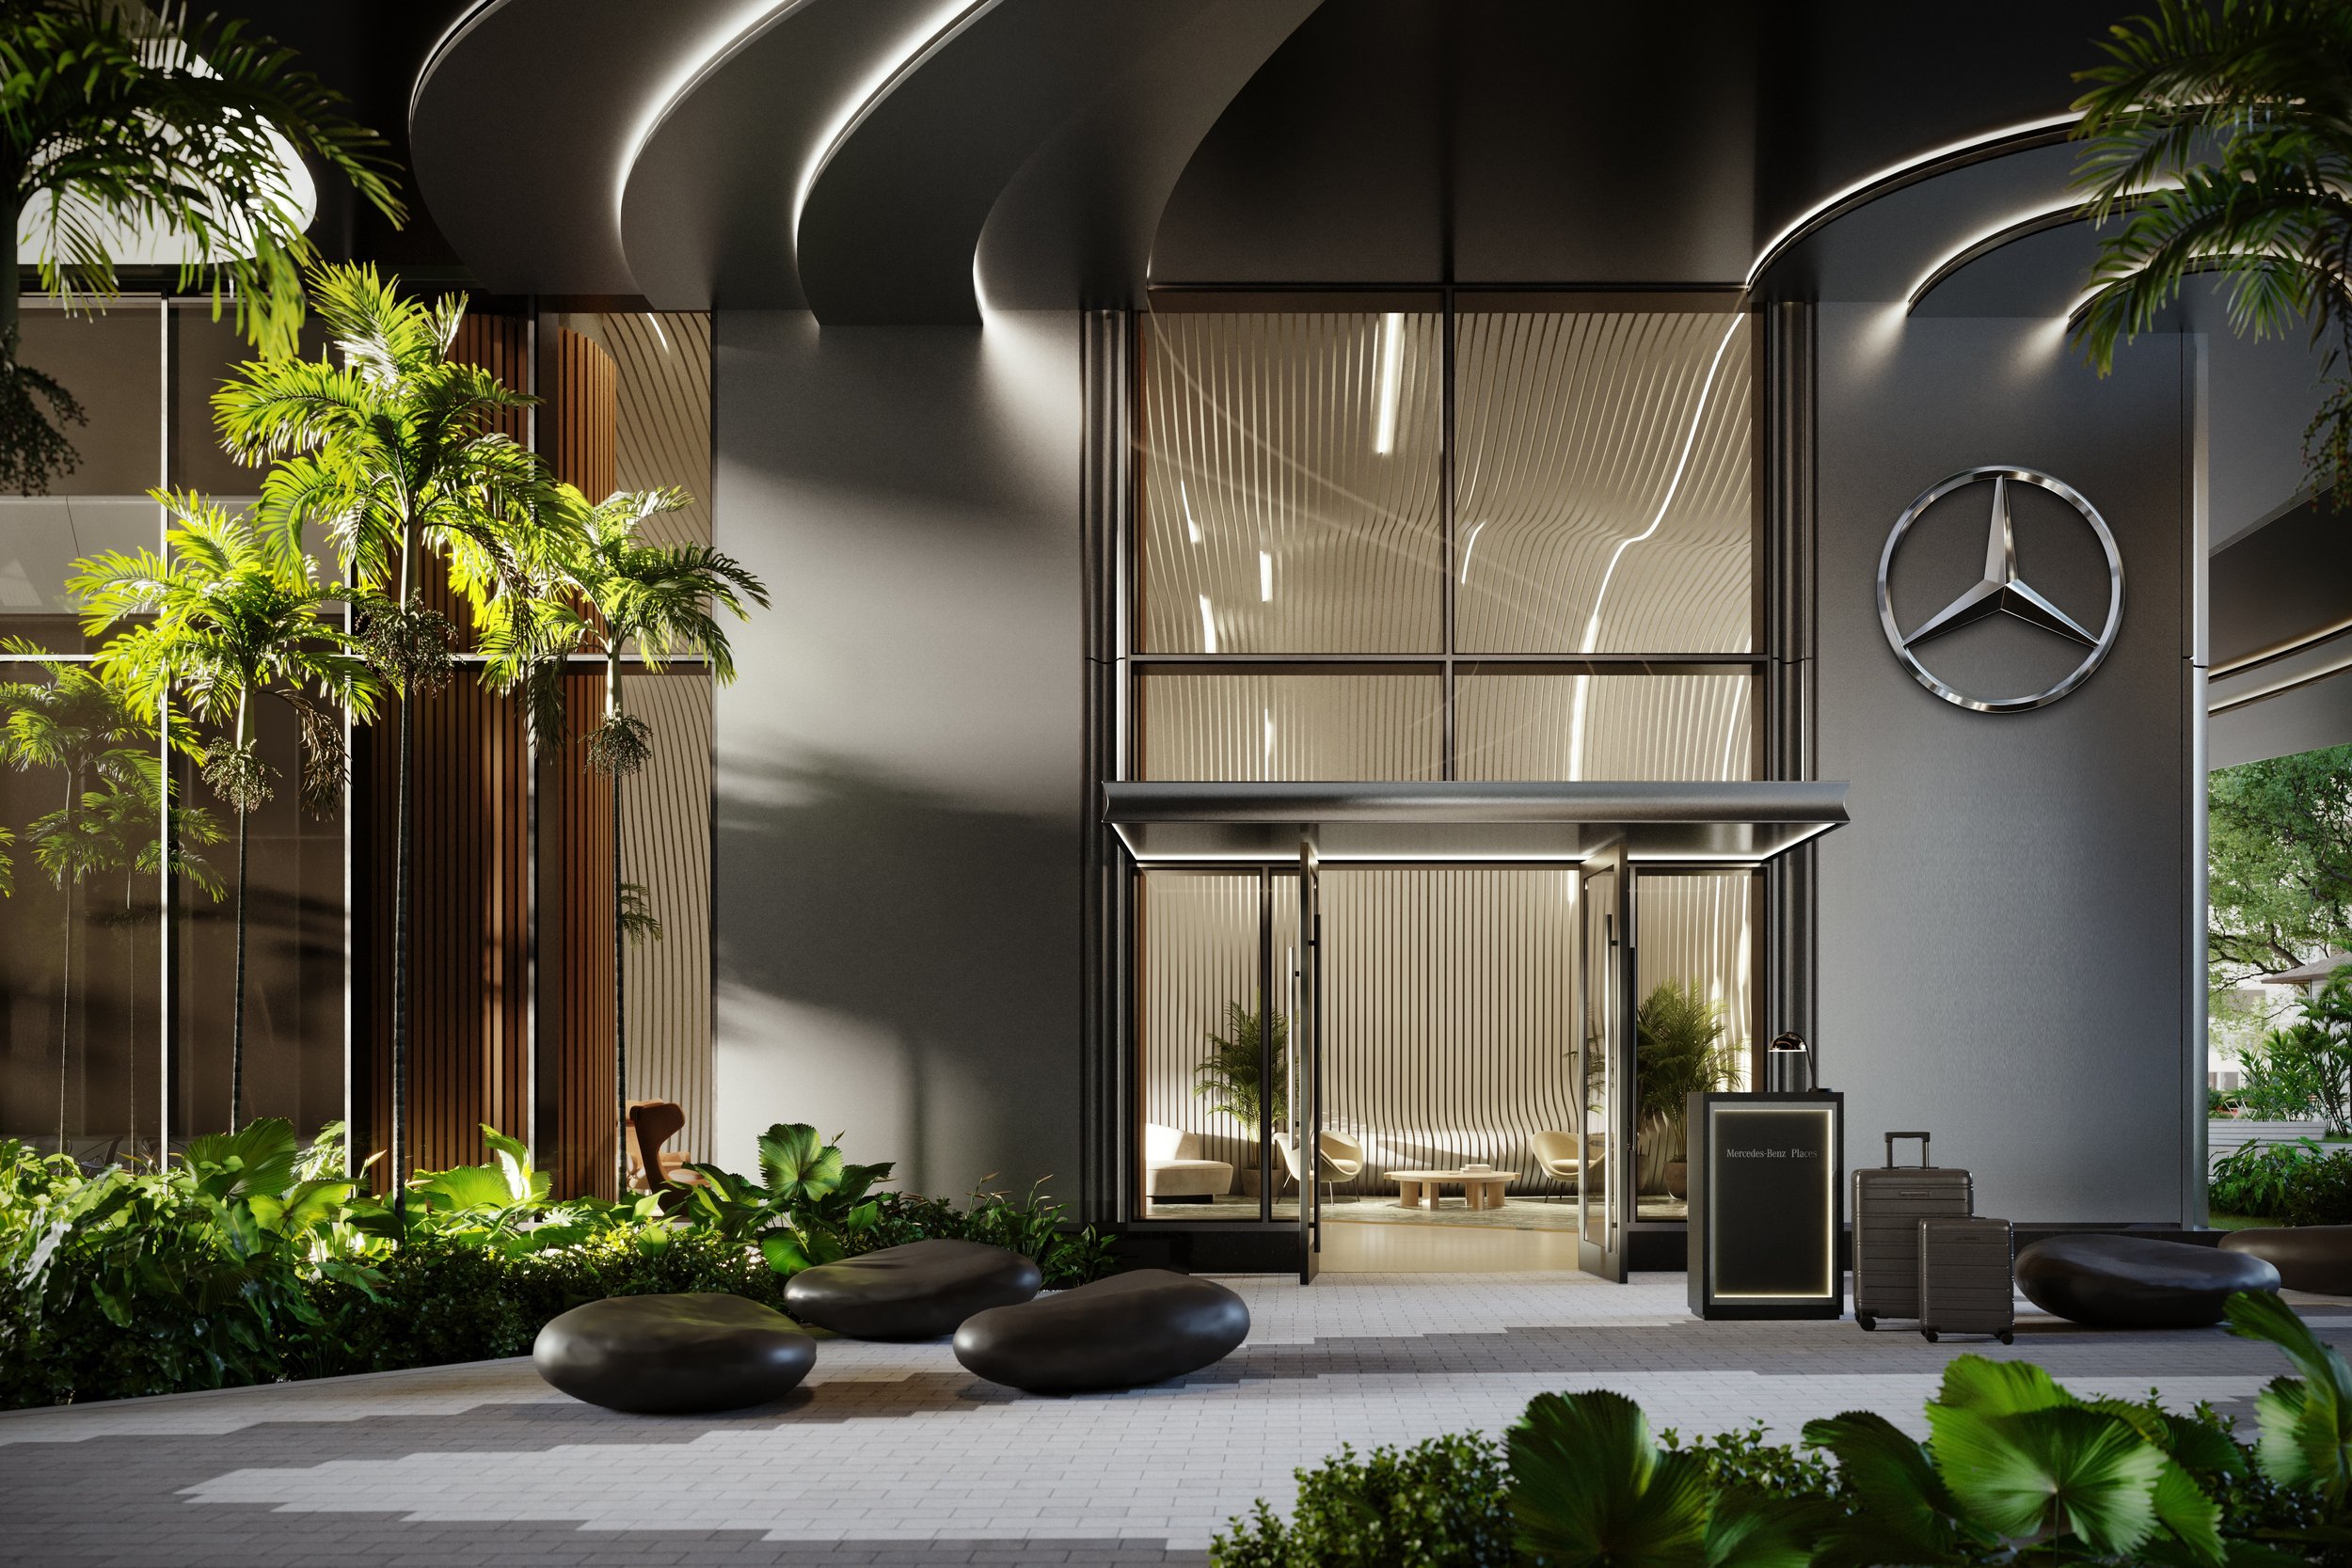 Miami's Real Estate Gets a Revamp with First-Ever Mercedes Benz Branded Residences